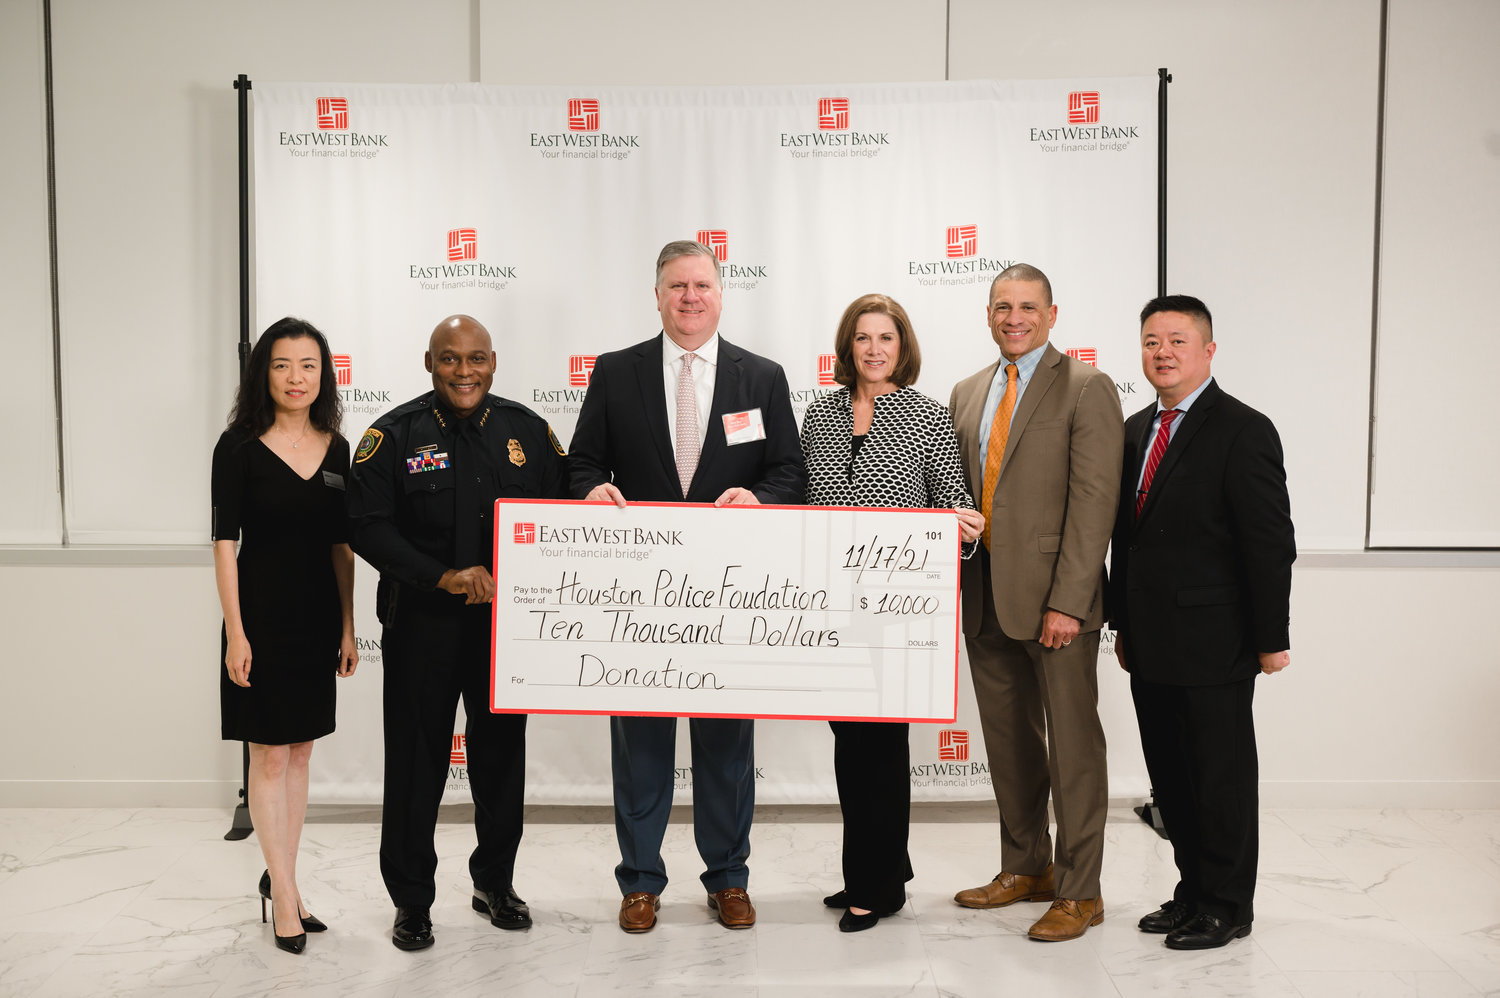 East West Bank representatives presented a $10,000 donation to the Houston Police Foundation on Nov. 18.